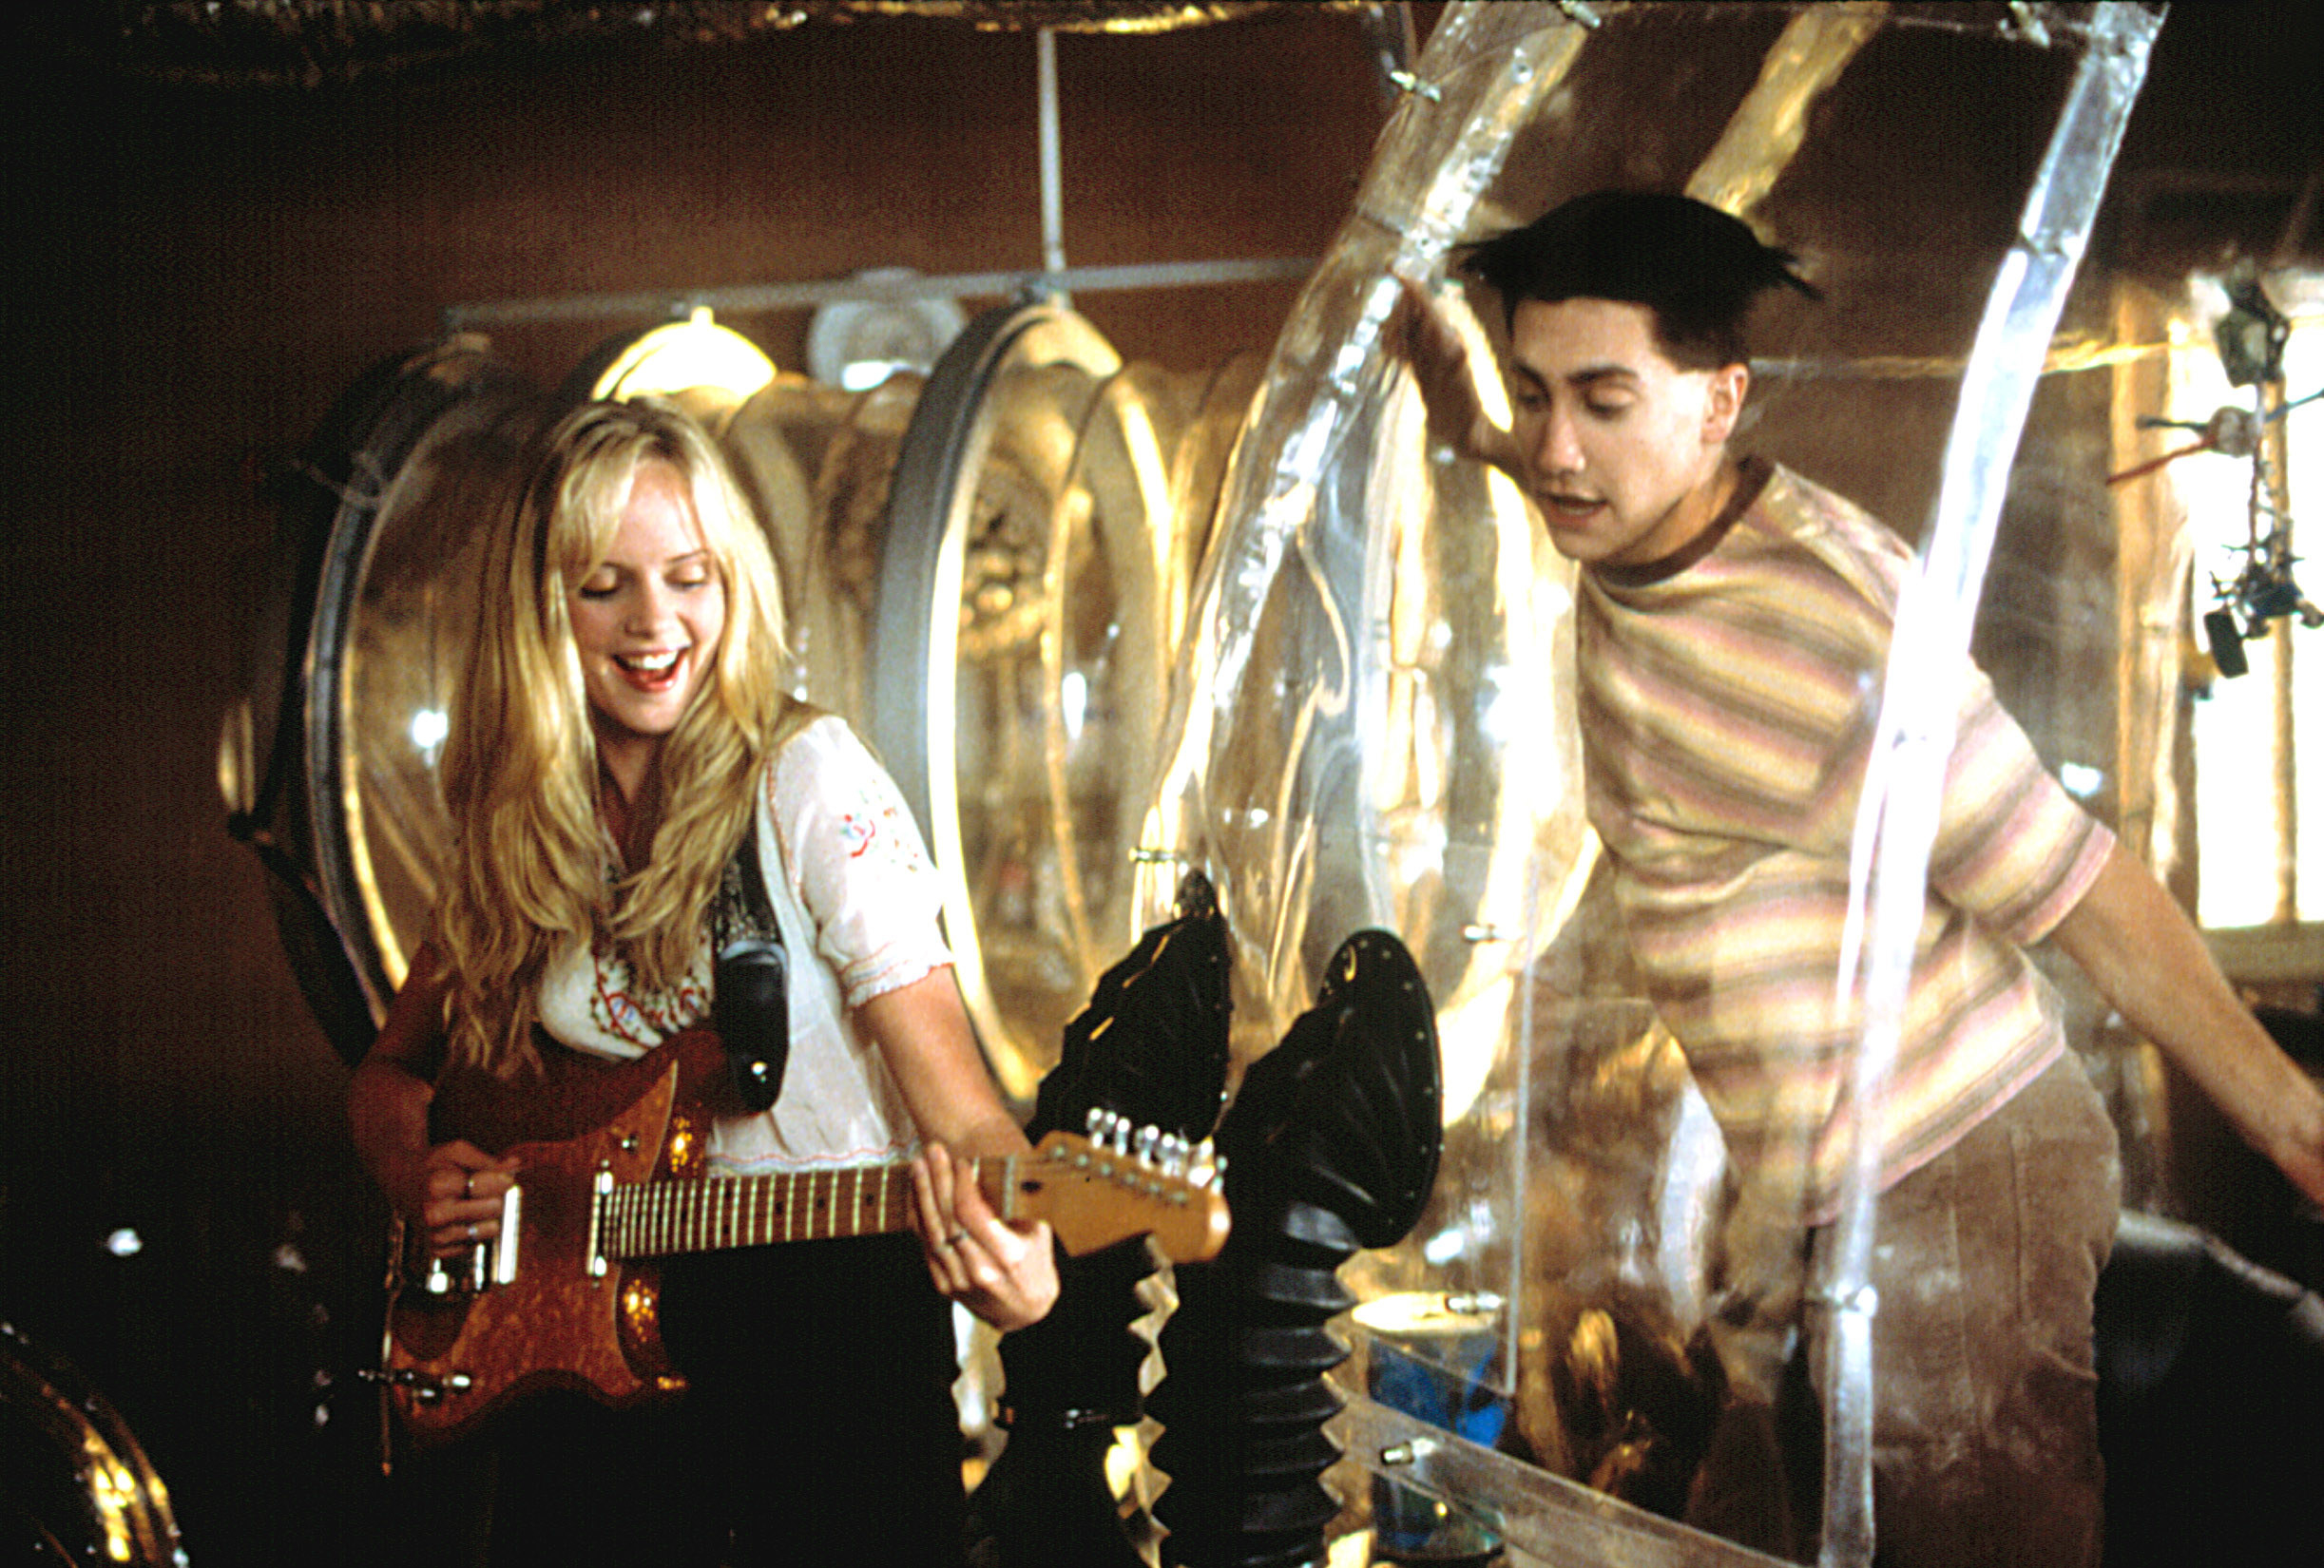 boy in a bubble watches as a girl plays guitar